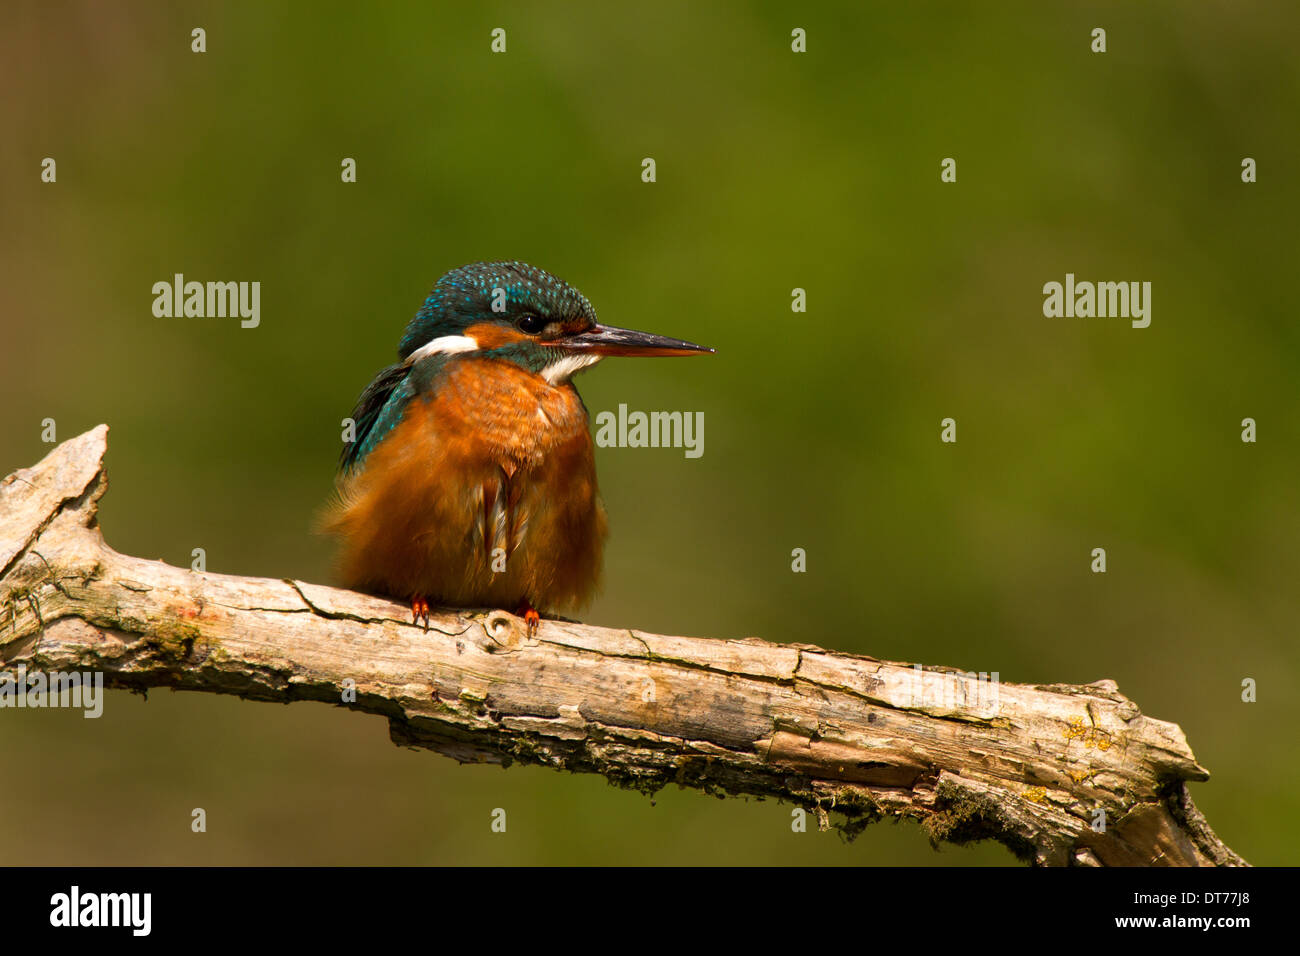 Kingfisher Alcedo atthis, Banque D'Images